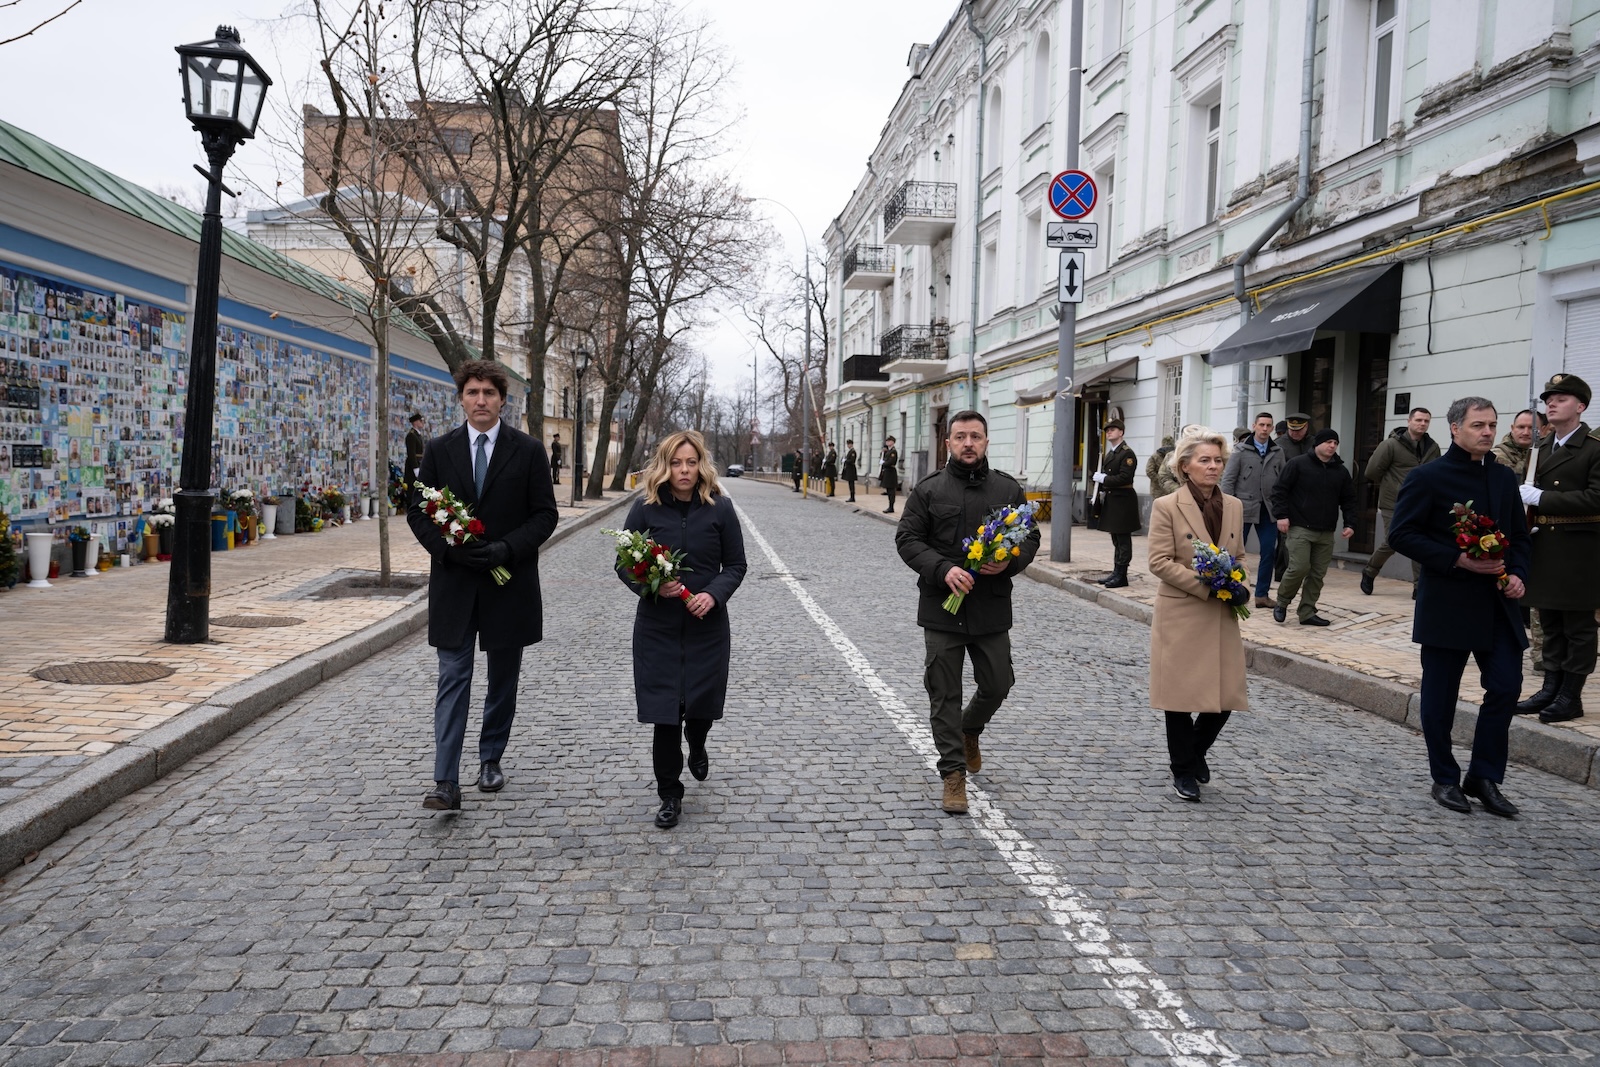 epa11177220 A handout photo made available by the Italian government press office shows (L-R) Canadian Prime Minister Justin Trudeau, Italian Prime Minister Giorgia Meloni, Ukrainian President Volodymyr Zelensky, President of the European Commission Ursula von der Leyen, and  Prime Minister of Belgium Alexander De Croo attending a wreath laying ceremony ahead of Italy's first meeting of G7 Heads of State and Government in its presidency, on the second anniversary of the Russian invasion of Ukraine, in Kyiv (Kiev), Ukraine, 24 February 2024. On 24 February 2024, Ukraine marks the second year since Russian troops entered its territory, starting a conflict that has provoked destruction and a humanitarian crisis.  EPA/FILIPPO ATTILI / ITALIAN GOVERNMENT PRESS OFFICE / HANDOUT  HANDOUT EDITORIAL USE ONLY/NO SALES HANDOUT EDITORIAL USE ONLY/NO SALES